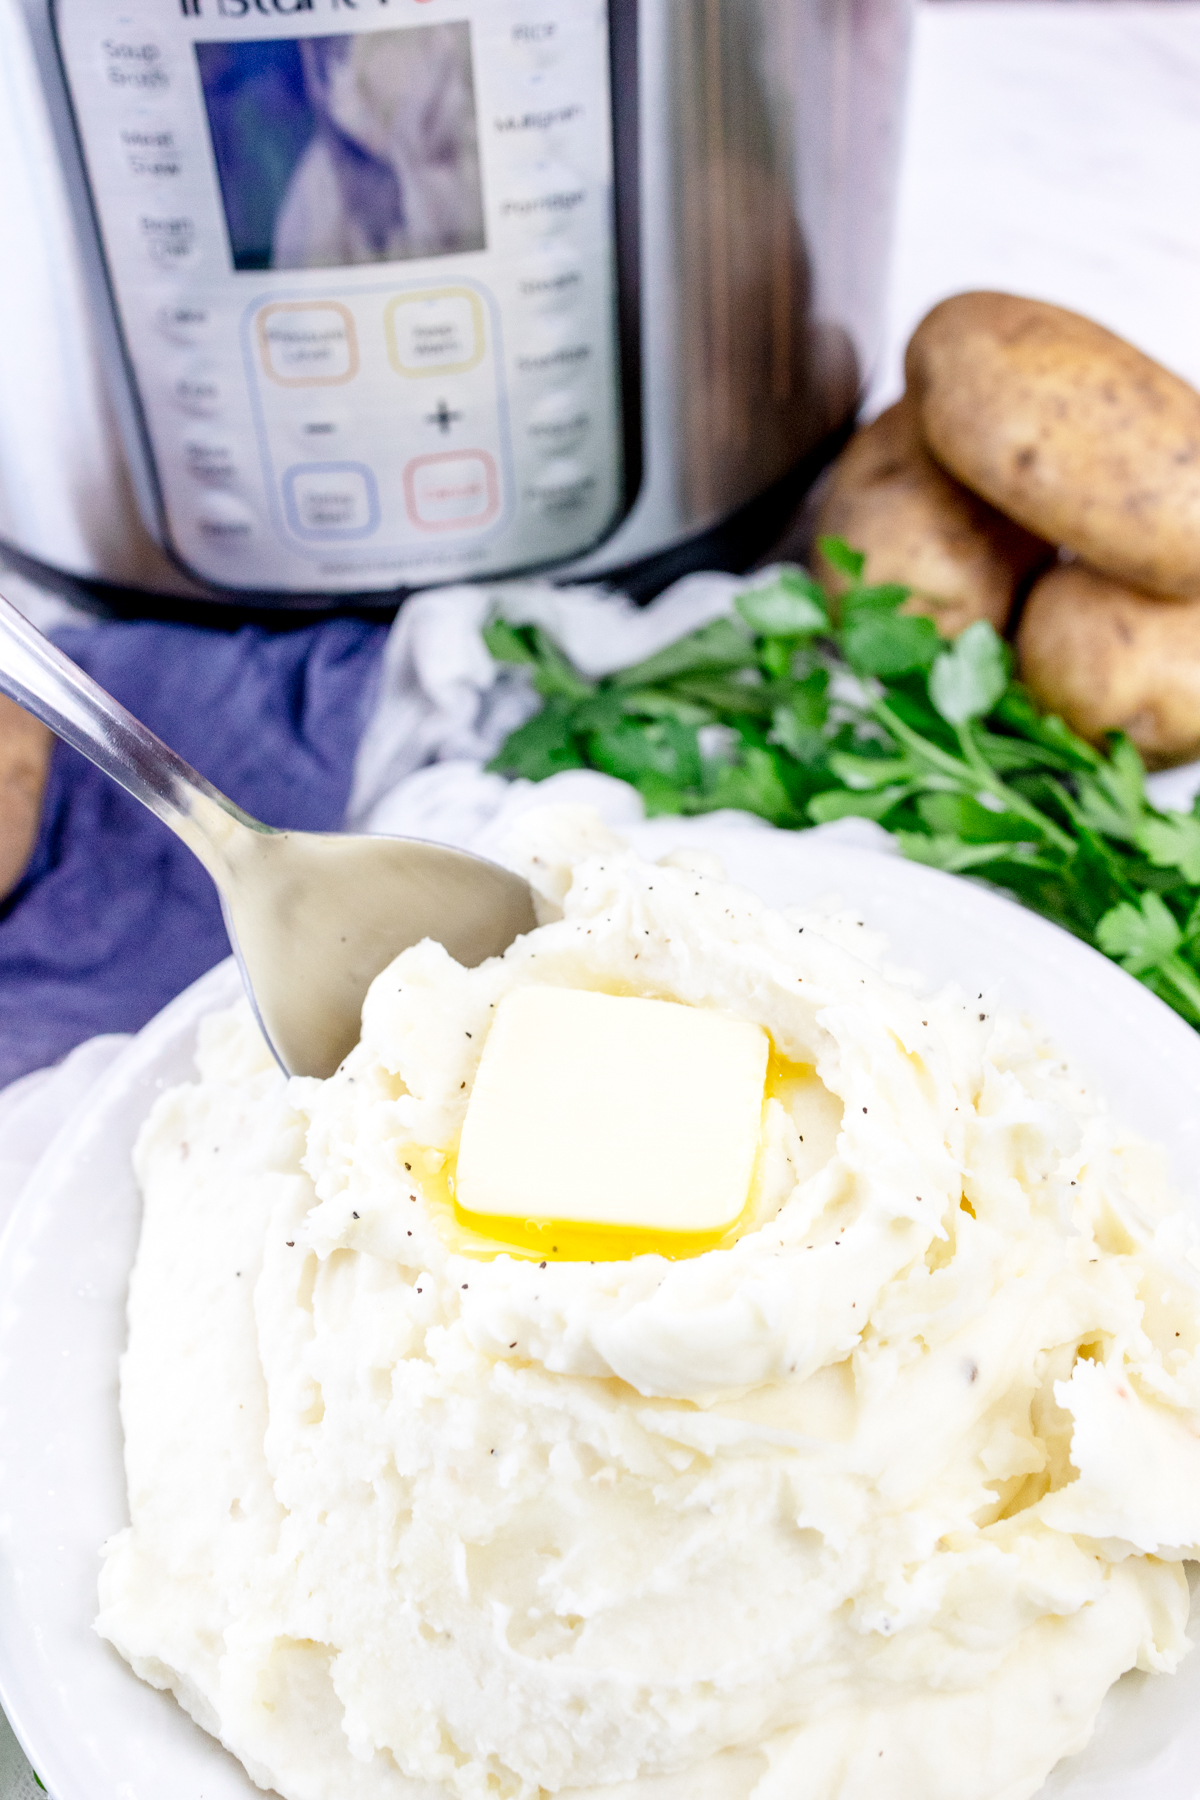 Top view of mashed potatoes with a melting chunk of butter on top and a spoon sticking out of it, in a white bowl on a table with an Instant Pot in the background, and decorations and ingredients around the bowl.